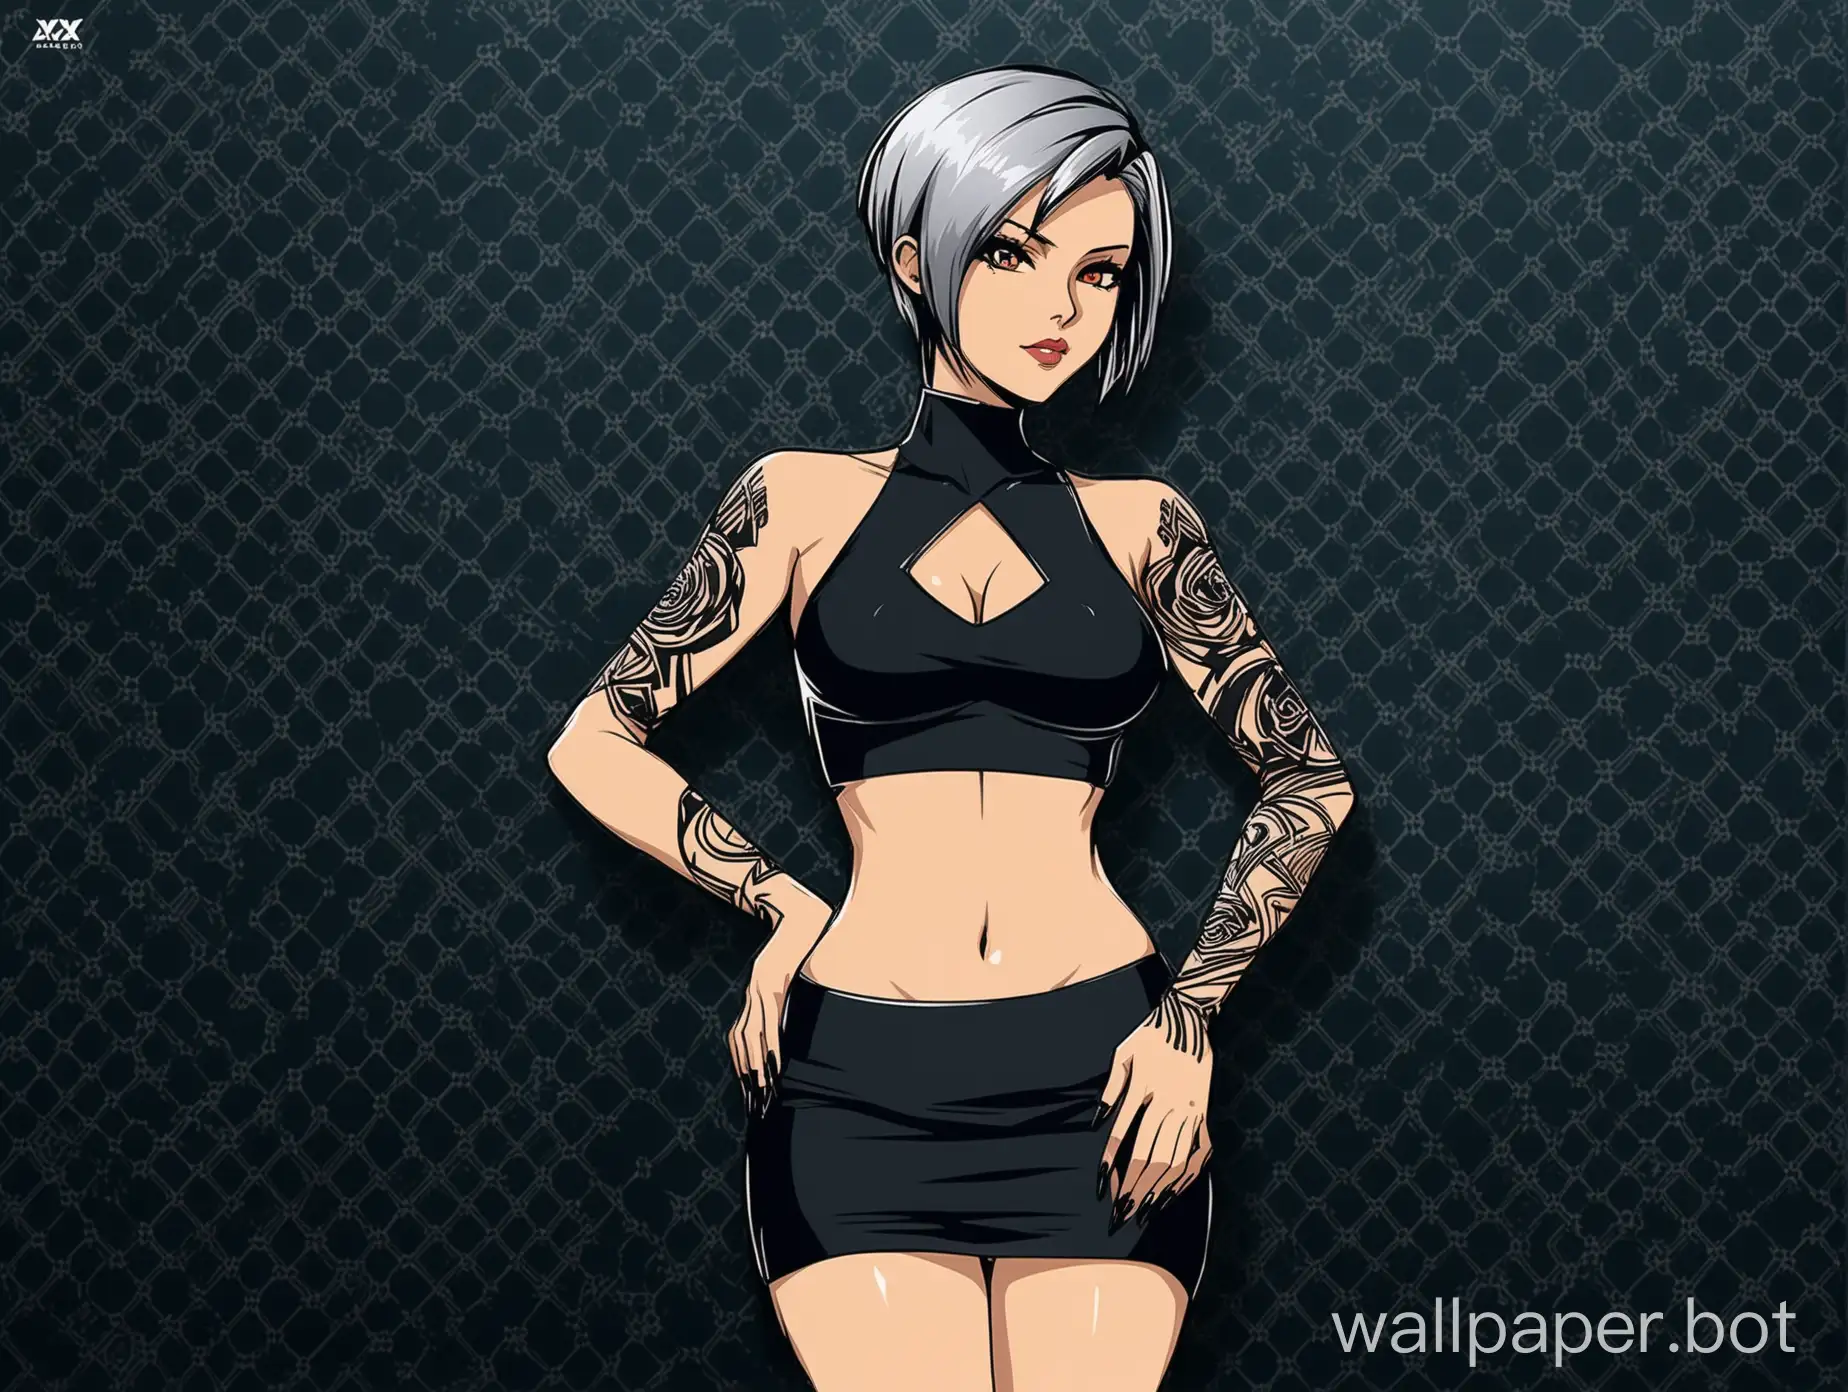 Design a captivating wallpaper featuring a sultry anime female character with a short silver hairstyle similar to Ruby Rose's character in 'XXX Return of Xander Cage'. The character should exude confidence and charisma, with a seductive yet edgy look that reflects her personality. Her silver short hairstyle should be sleek and modern, adding to her bold and dynamic appearance. Dress her in a fitted crop top with strategic cut-outs that accentuate her curvy physique, paired with a sleek bodycon skirt that hugs her figure. Enhance her sexiness with subtle yet alluring poses and expressions. Incorporate elements of Arch Linux, such as the logo or color scheme, into the background or accessories to give the wallpaper a tech-inspired edge. The background should be monochromatic, clean, and mineralistic, with subtle textures to add depth and interest while maintaining a minimalist aesthetic.